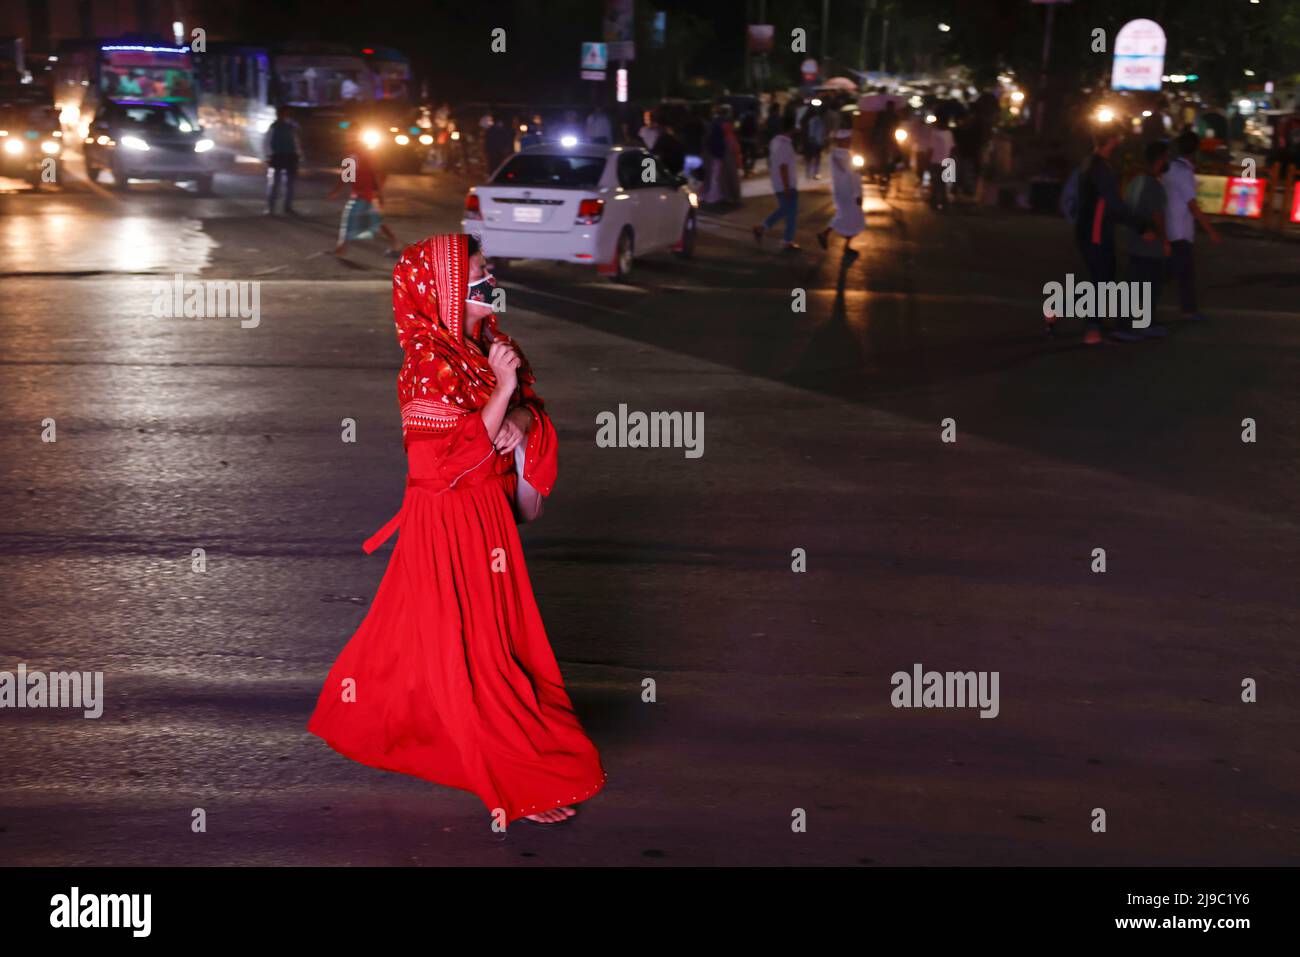 A woman wearing a red dress, crosses a road at night in Dhaka, Bangladesh, May 22, 2022. REUTERS/Mohammad Ponir Hossain Stock Photo